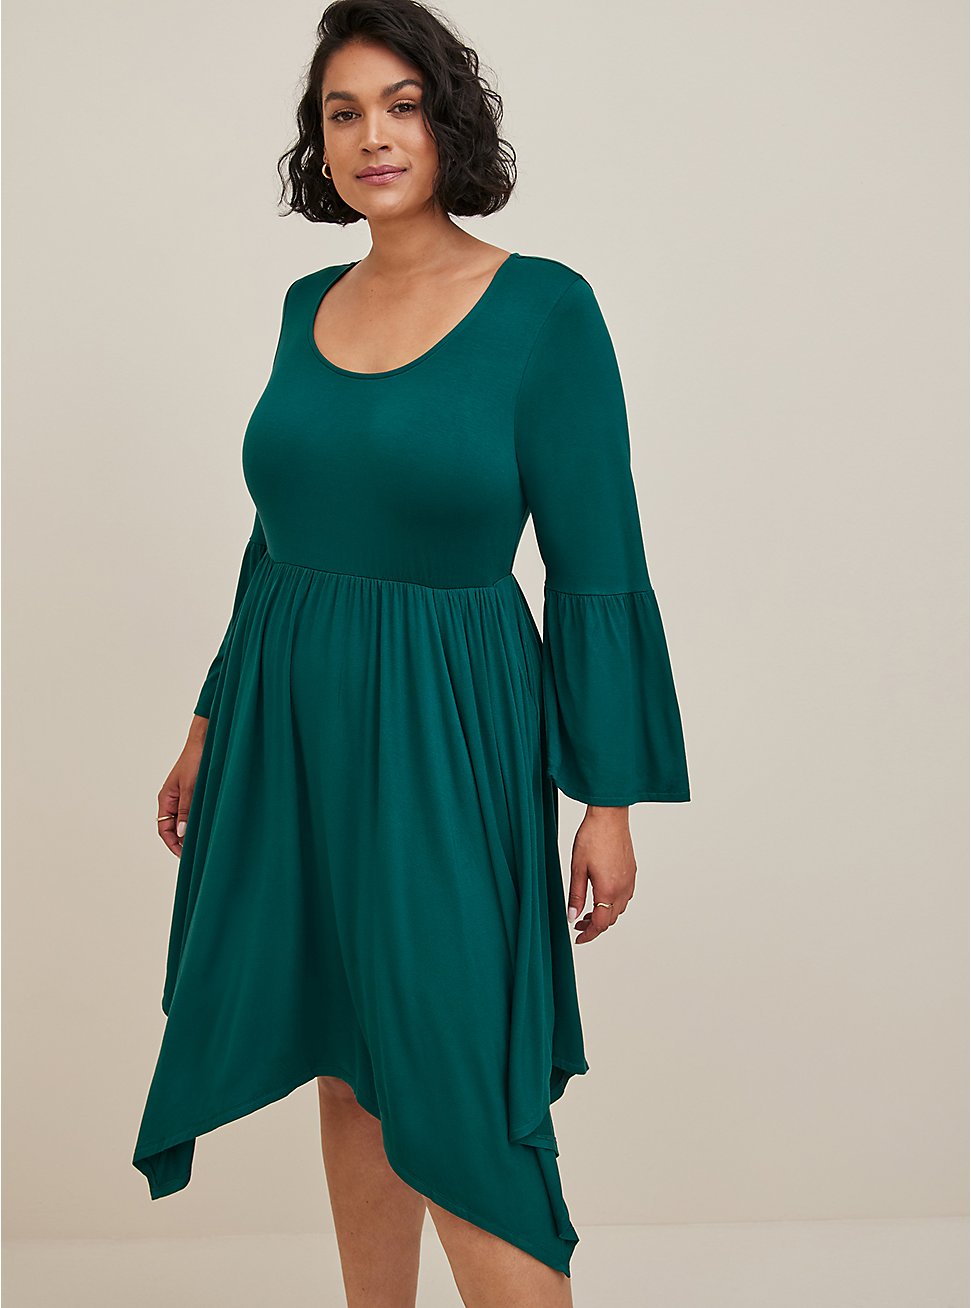 Plus Size Midi Supersoft Bell Sleeve Hanky Dress, GREEN, hi-res